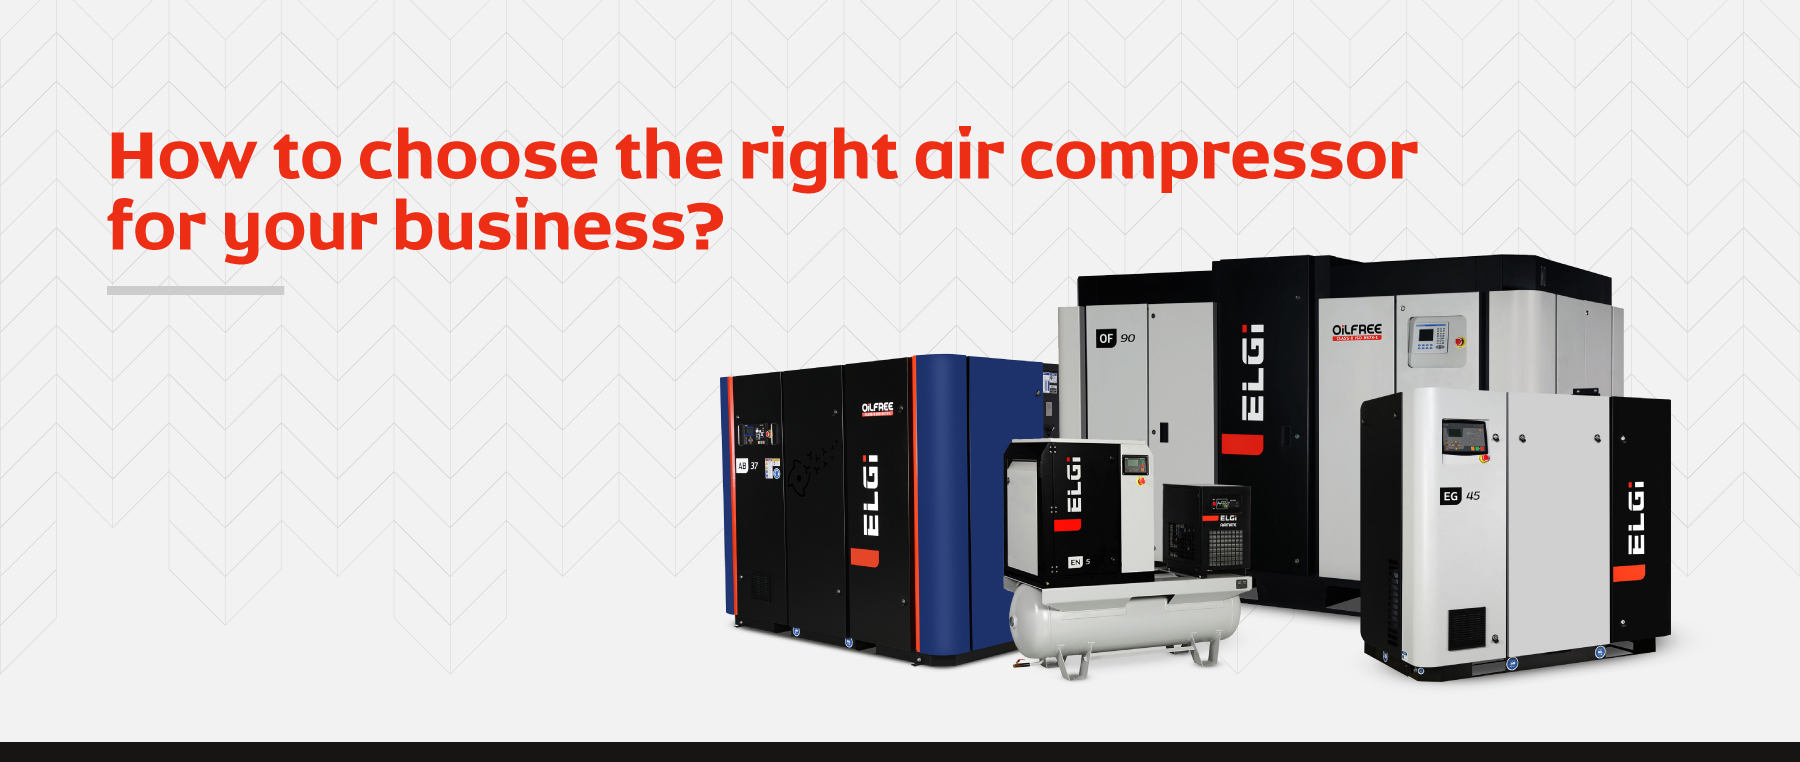 How To Choose The Right Air Compressor?